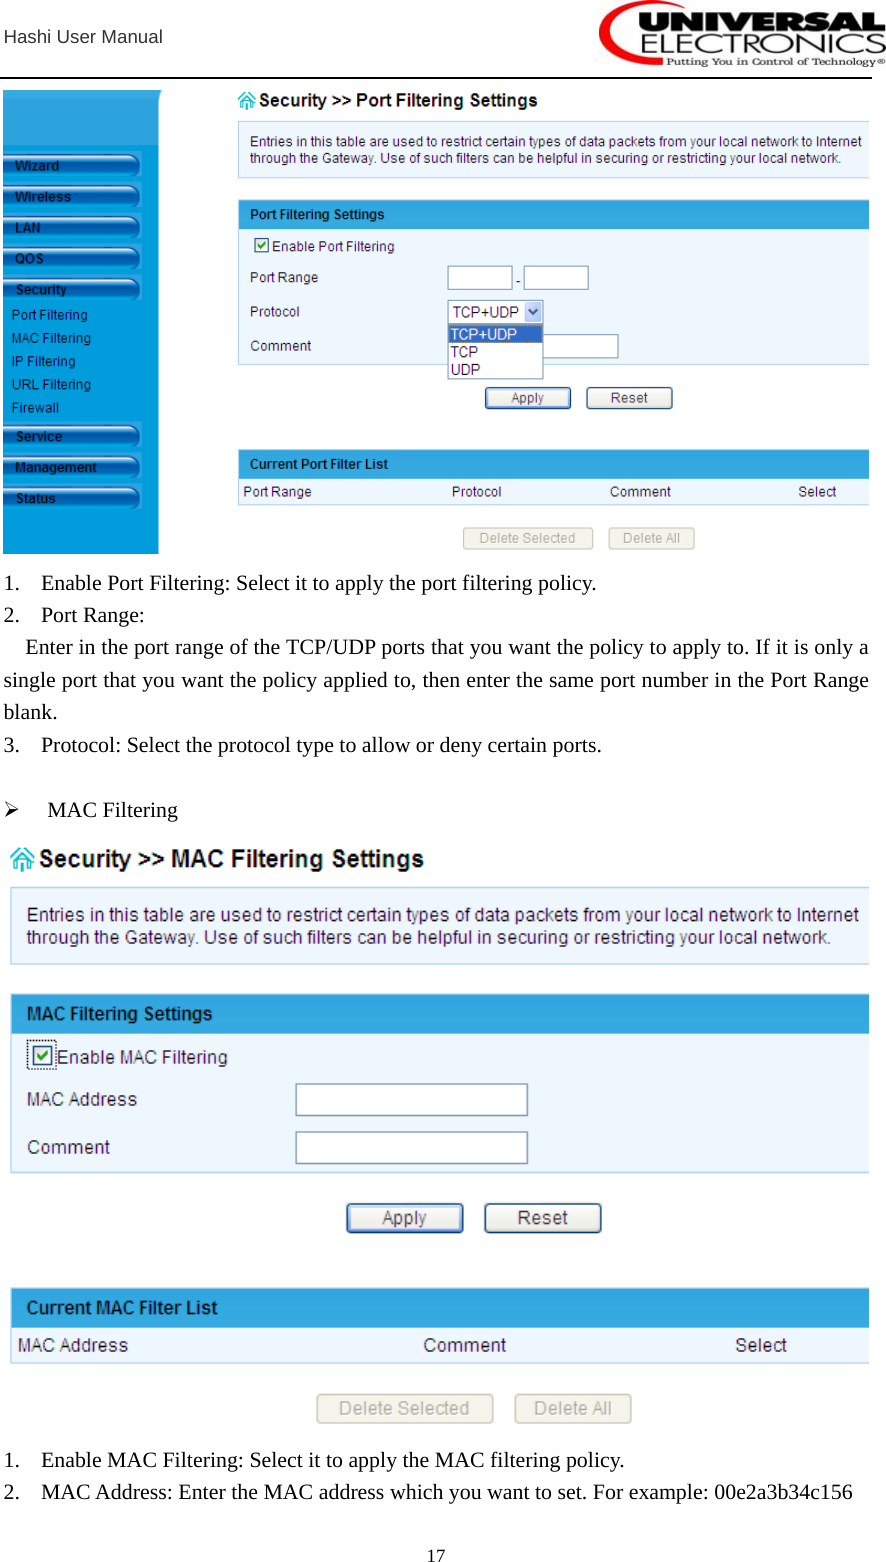  Hashi User Manual  17 1. Enable Port Filtering: Select it to apply the port filtering policy. 2. Port Range: Enter in the port range of the TCP/UDP ports that you want the policy to apply to. If it is only a single port that you want the policy applied to, then enter the same port number in the Port Range blank.  3. Protocol: Select the protocol type to allow or deny certain ports.  ¾ MAC Filtering  1. Enable MAC Filtering: Select it to apply the MAC filtering policy. 2. MAC Address: Enter the MAC address which you want to set. For example: 00e2a3b34c156 